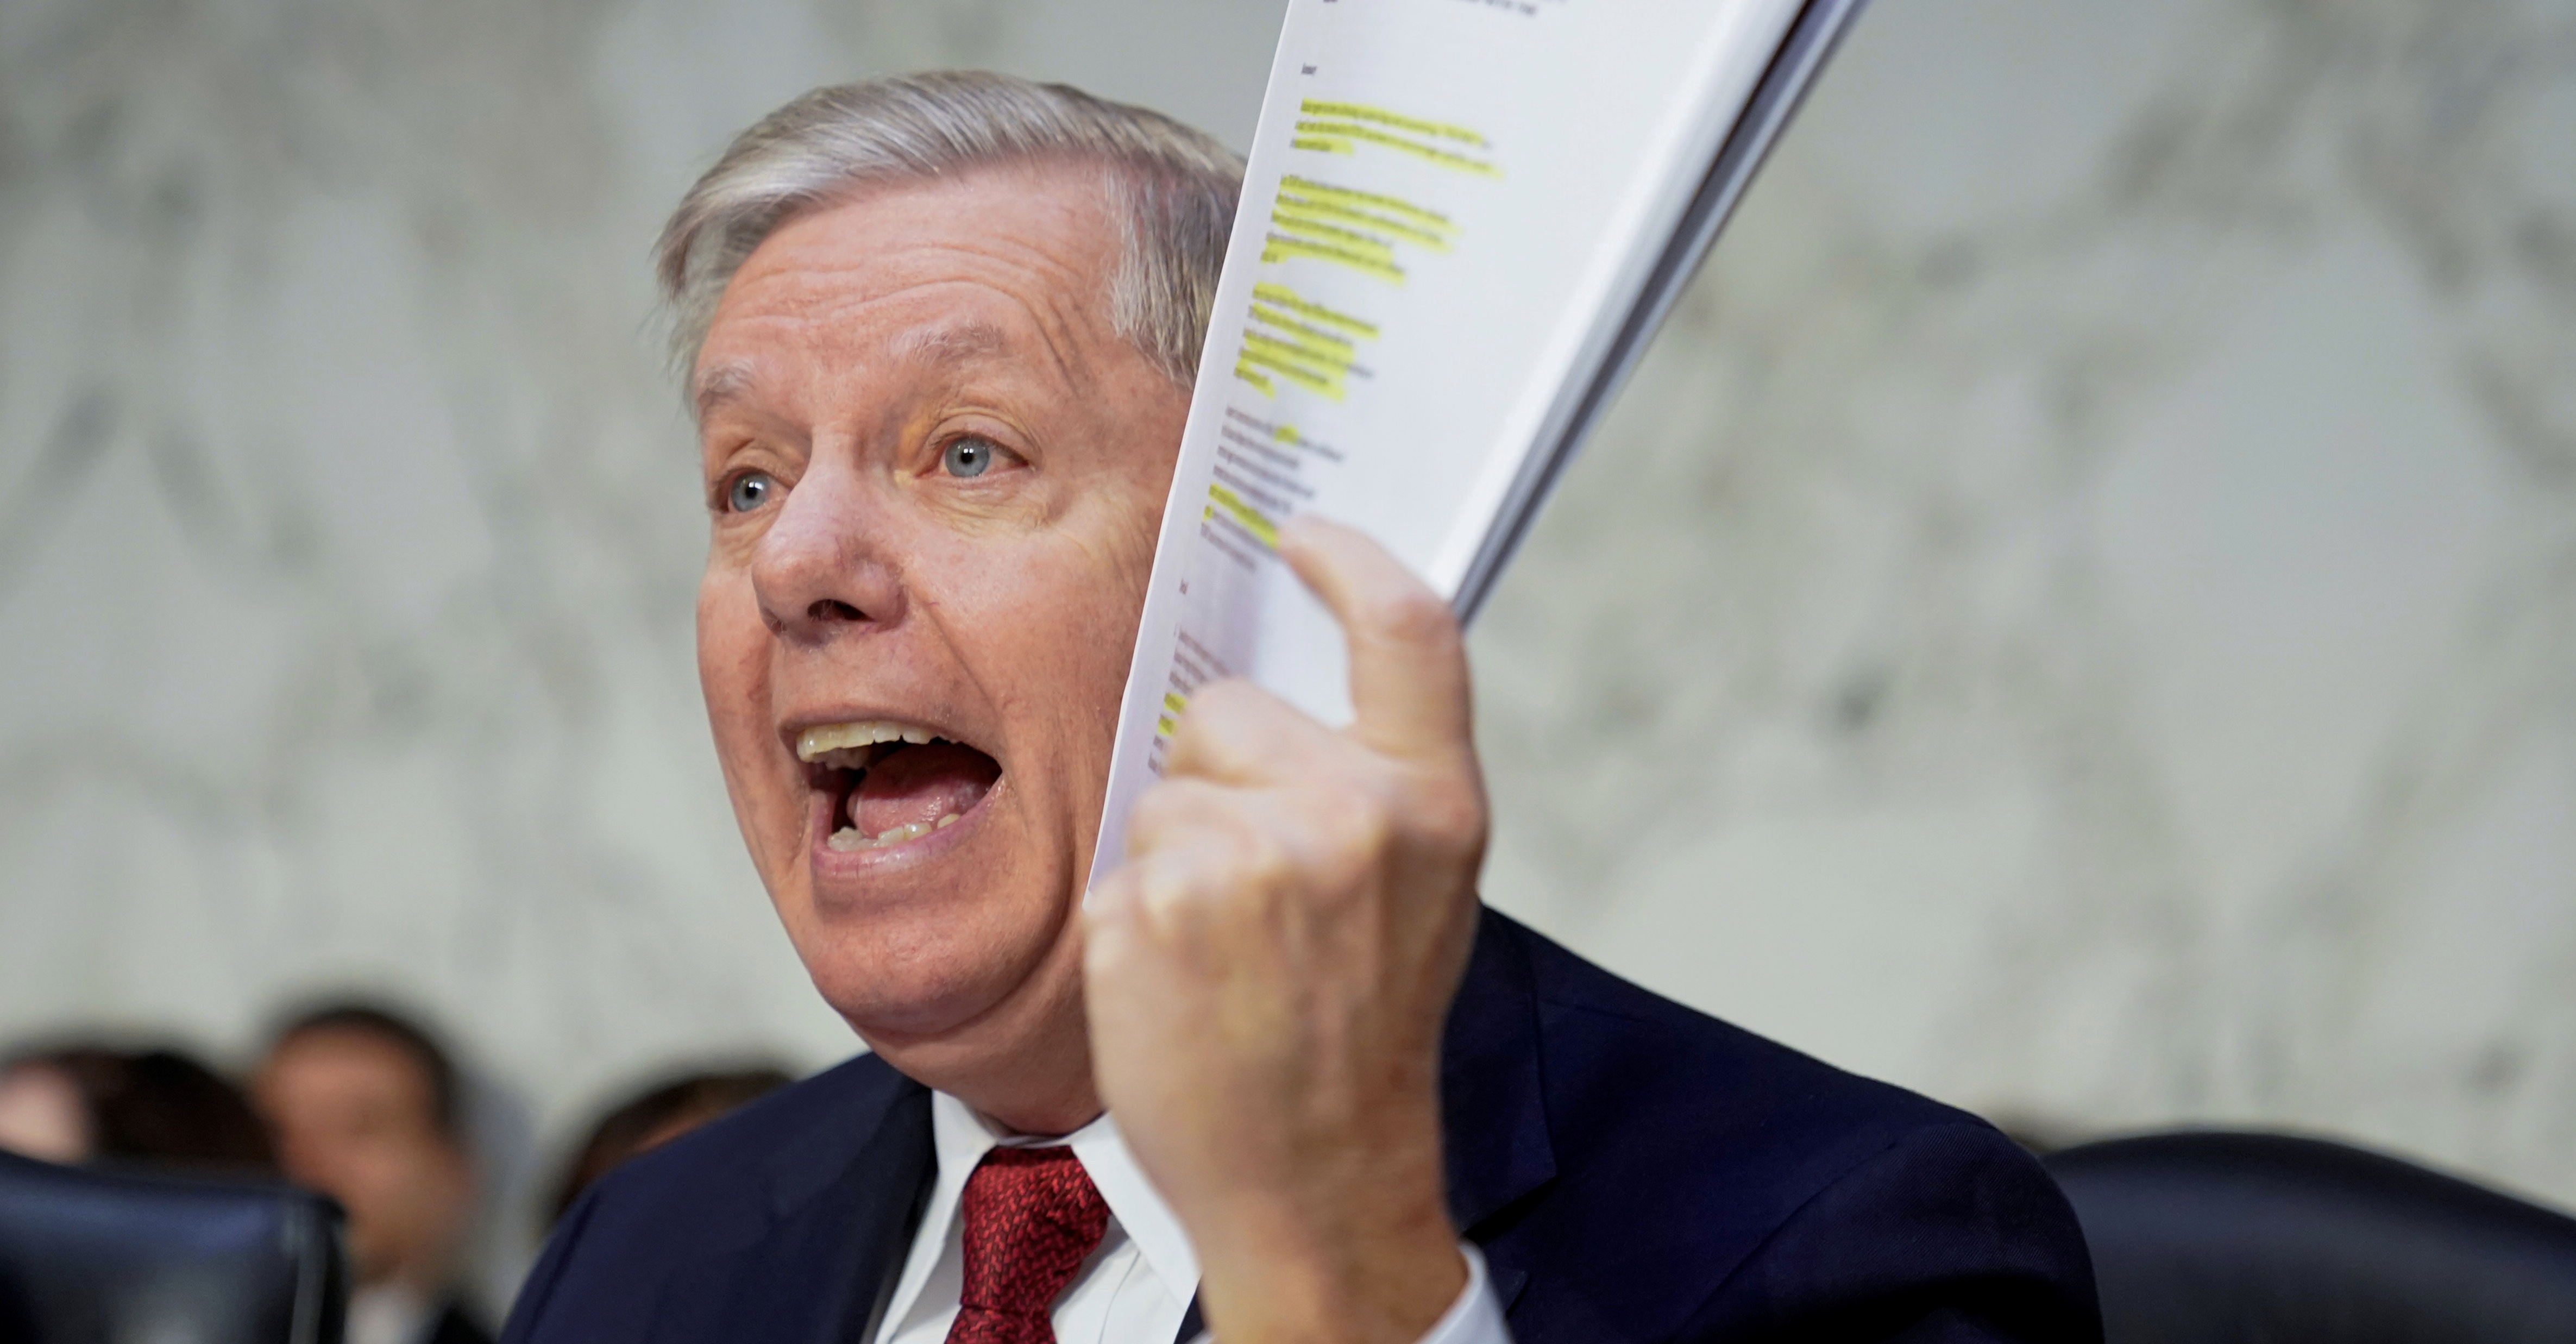 U.S. Senate Judiciary Committee Chairman Senator Lindsey Graham (R-SC) holds a copy of an intelligence report on the Steele dossier as he delivers an opening statement prior to hearing testimony from Justice Department Inspector General Michael Horowitz before a Senate Judiciary Committee hearing "Examining the Inspector General's report on alleged abuses of the Foreign Intelligence Surveillance Act (FISA)" on Capitol Hill in Washington, U.S., December 11, 2019. REUTERS/Joshua Roberts -